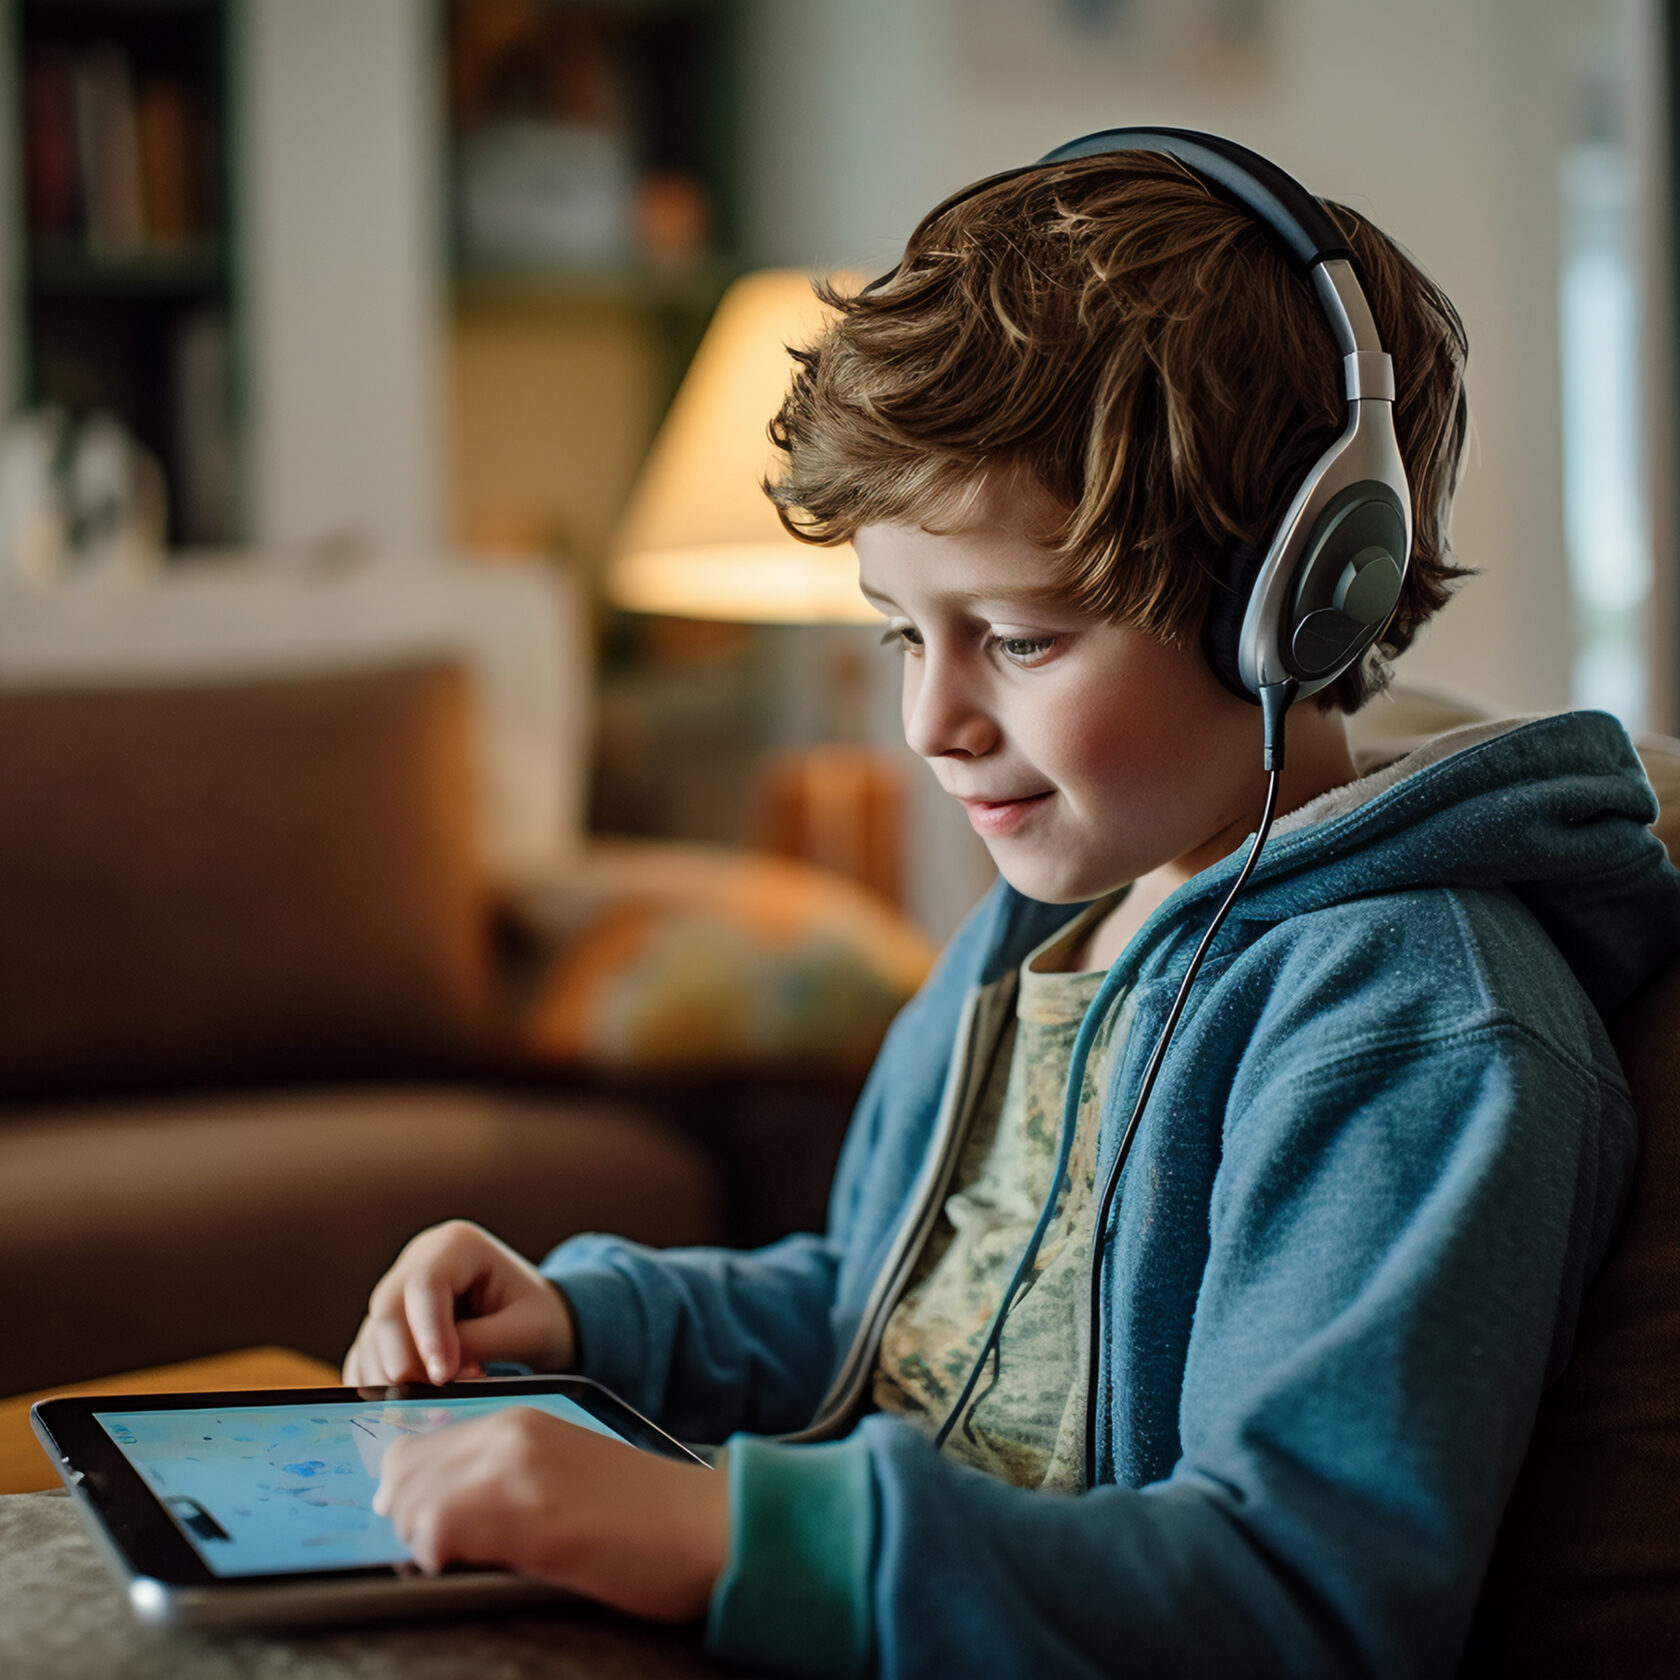 autistic boy with noice cancelling headphones using his AAC device to communicate in the living room